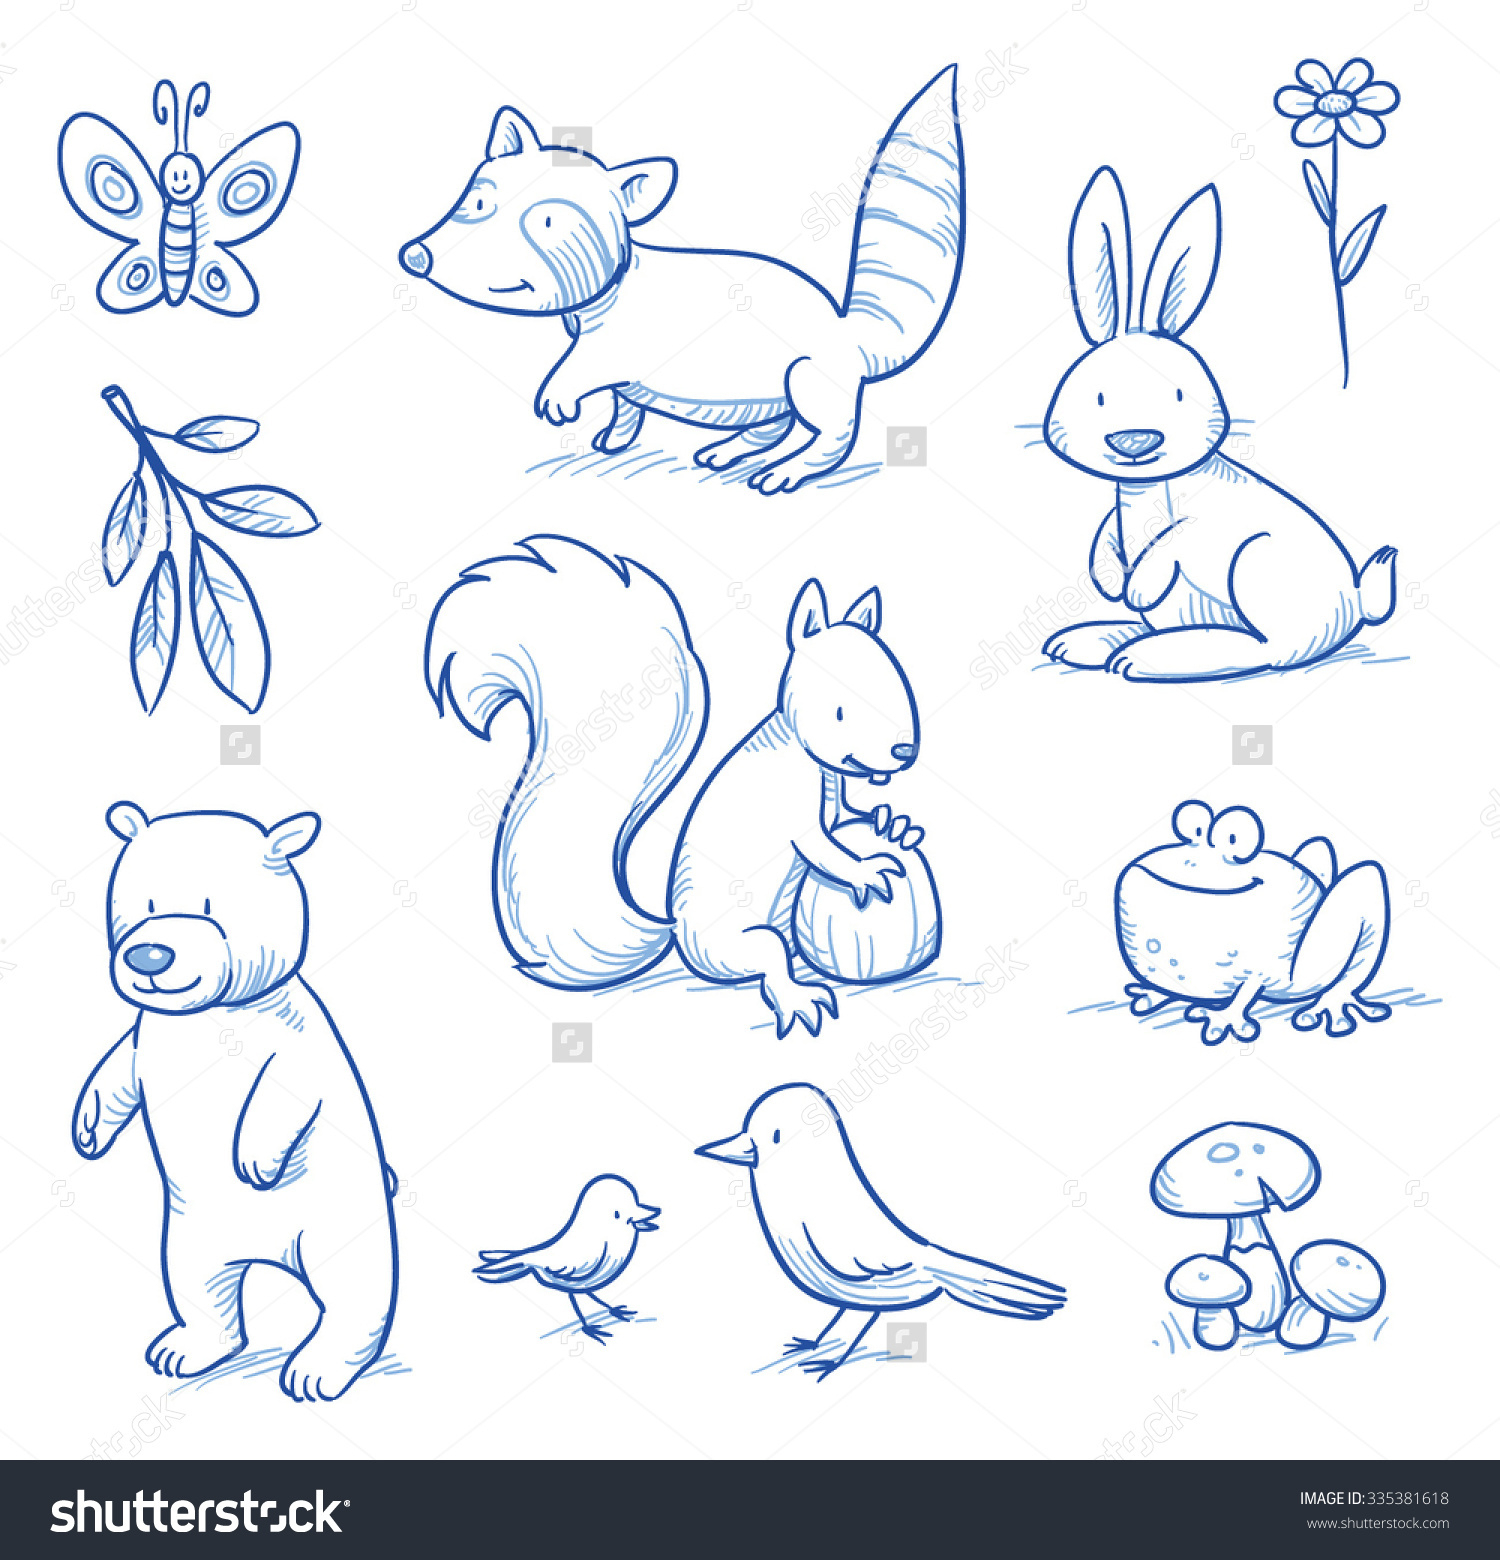 Forest Animals Drawing Kids : The 25+ best Woodland animals ideas on